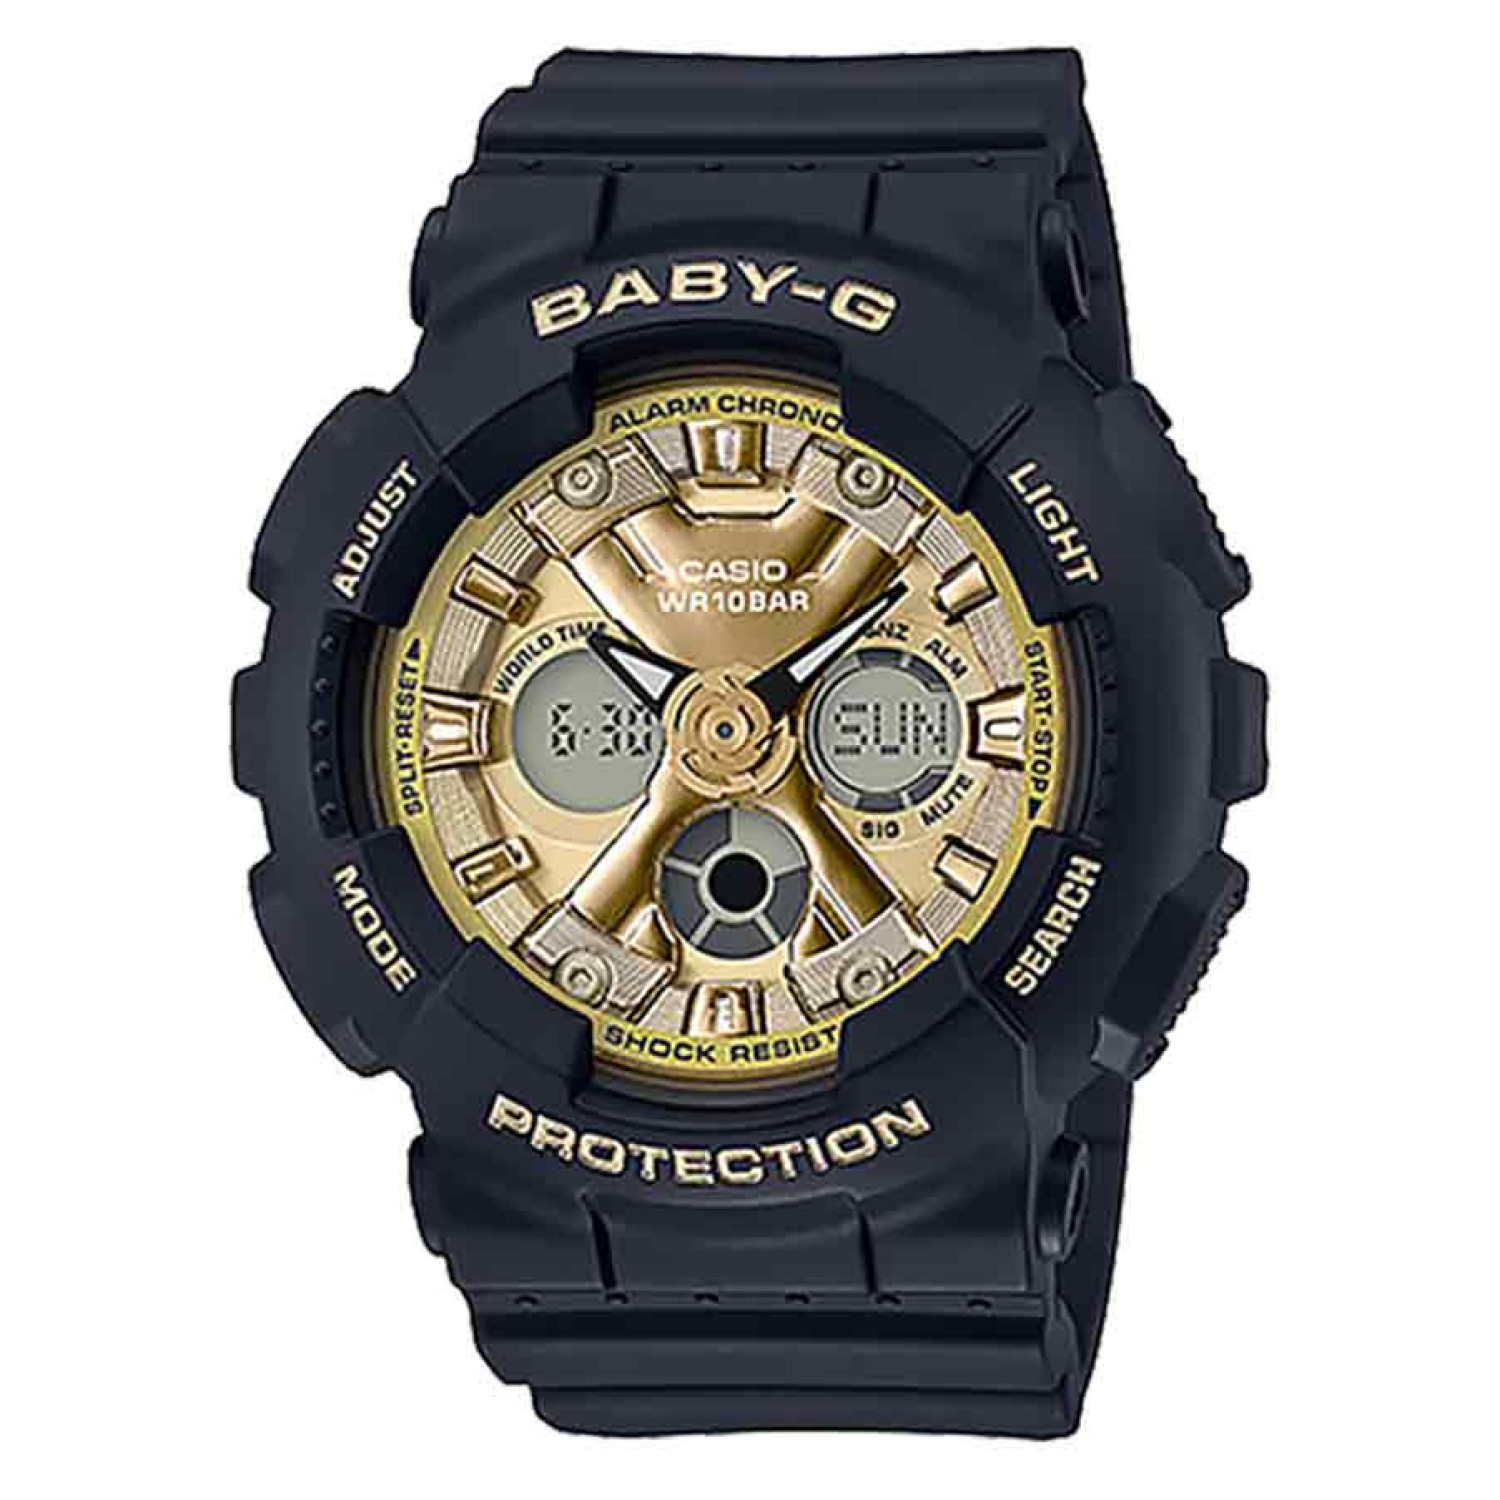 BA130-1A3 Casio BabY-G Special Colours Series. From BABY-G, the casual watch for active women, come gorgeous new models for the holiday season. The base model is the popular big case, mannish BA-130, and brilliantly coloured metal face parts create design